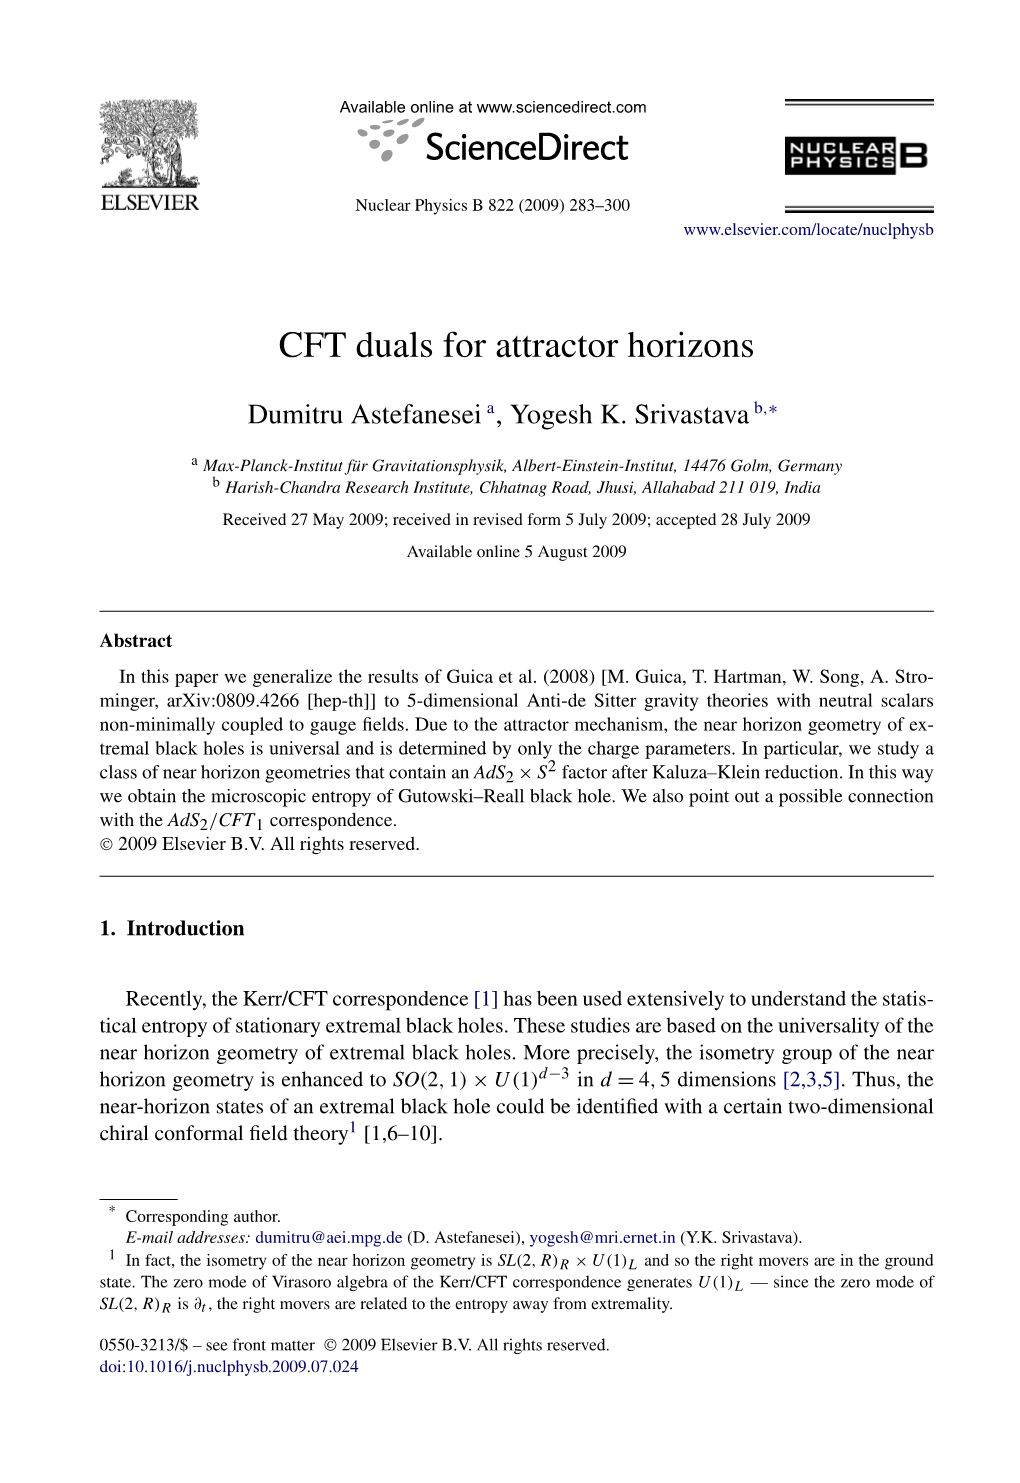 CFT Duals for Attractor Horizons